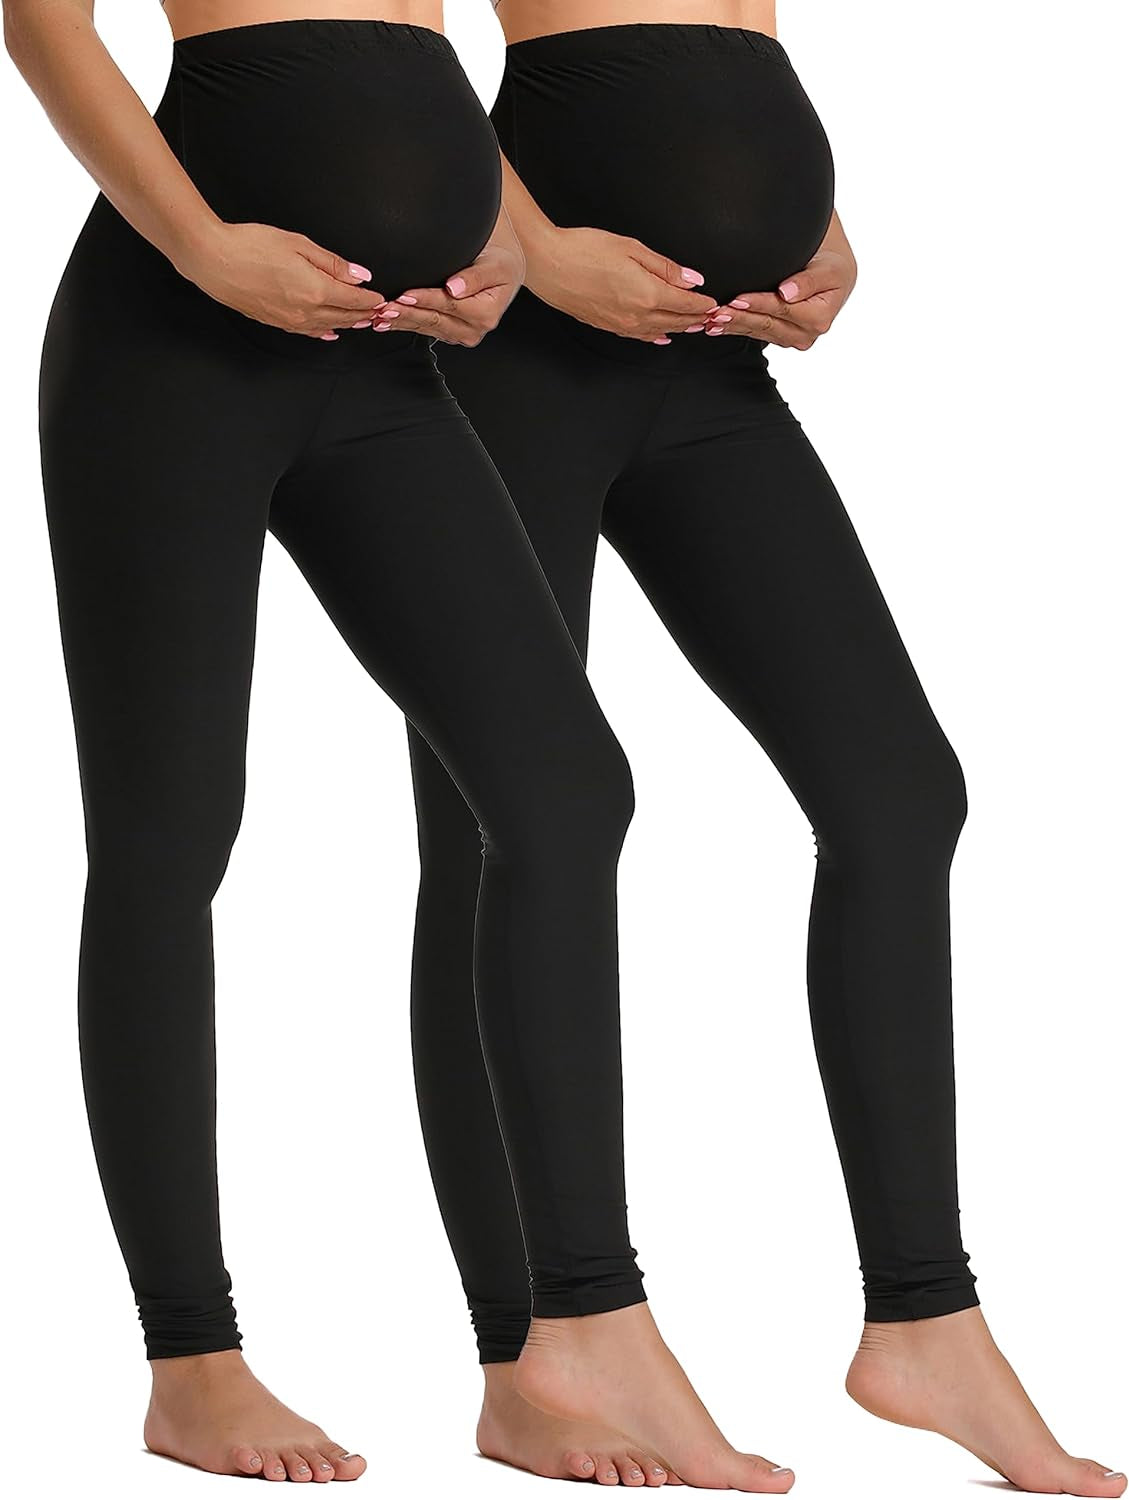 Women'S Maternity Leggings over the Belly Pregnancy Active Workout Yoga Tights Pants